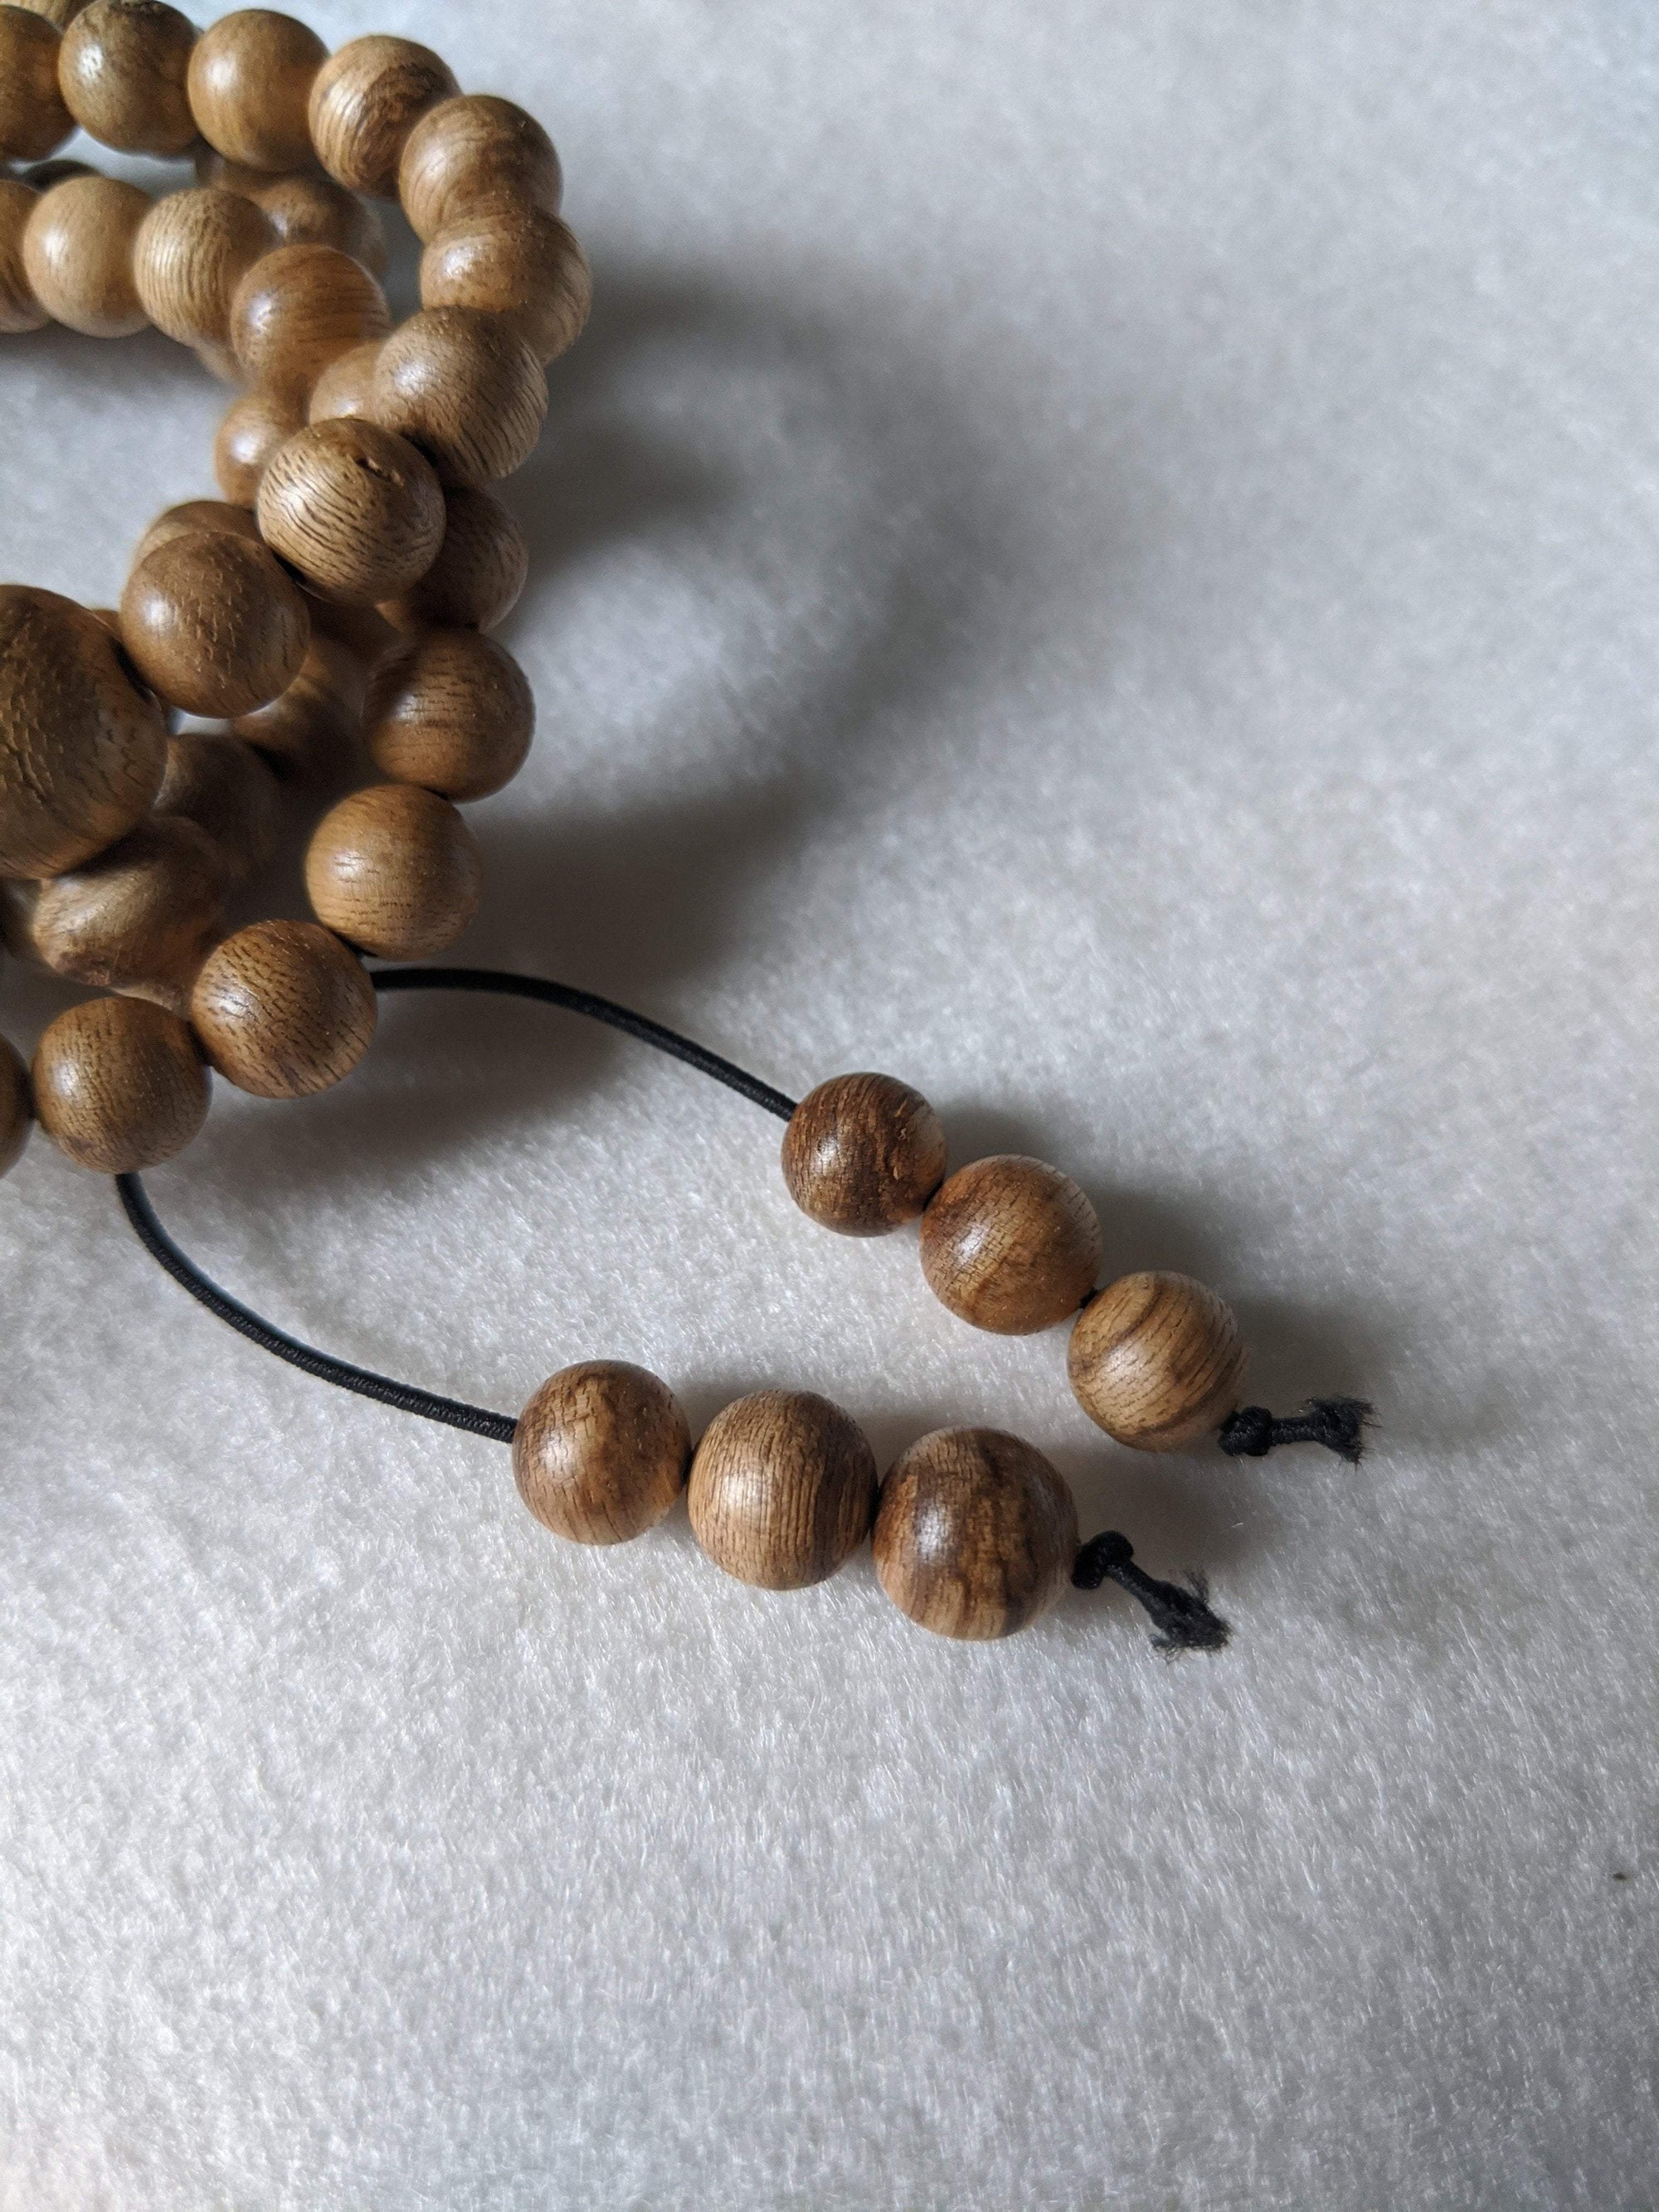 SOLD- 12.5 g, 8mm, Wild Borneo Agarwood 108 mala with a large piece of remaining material -